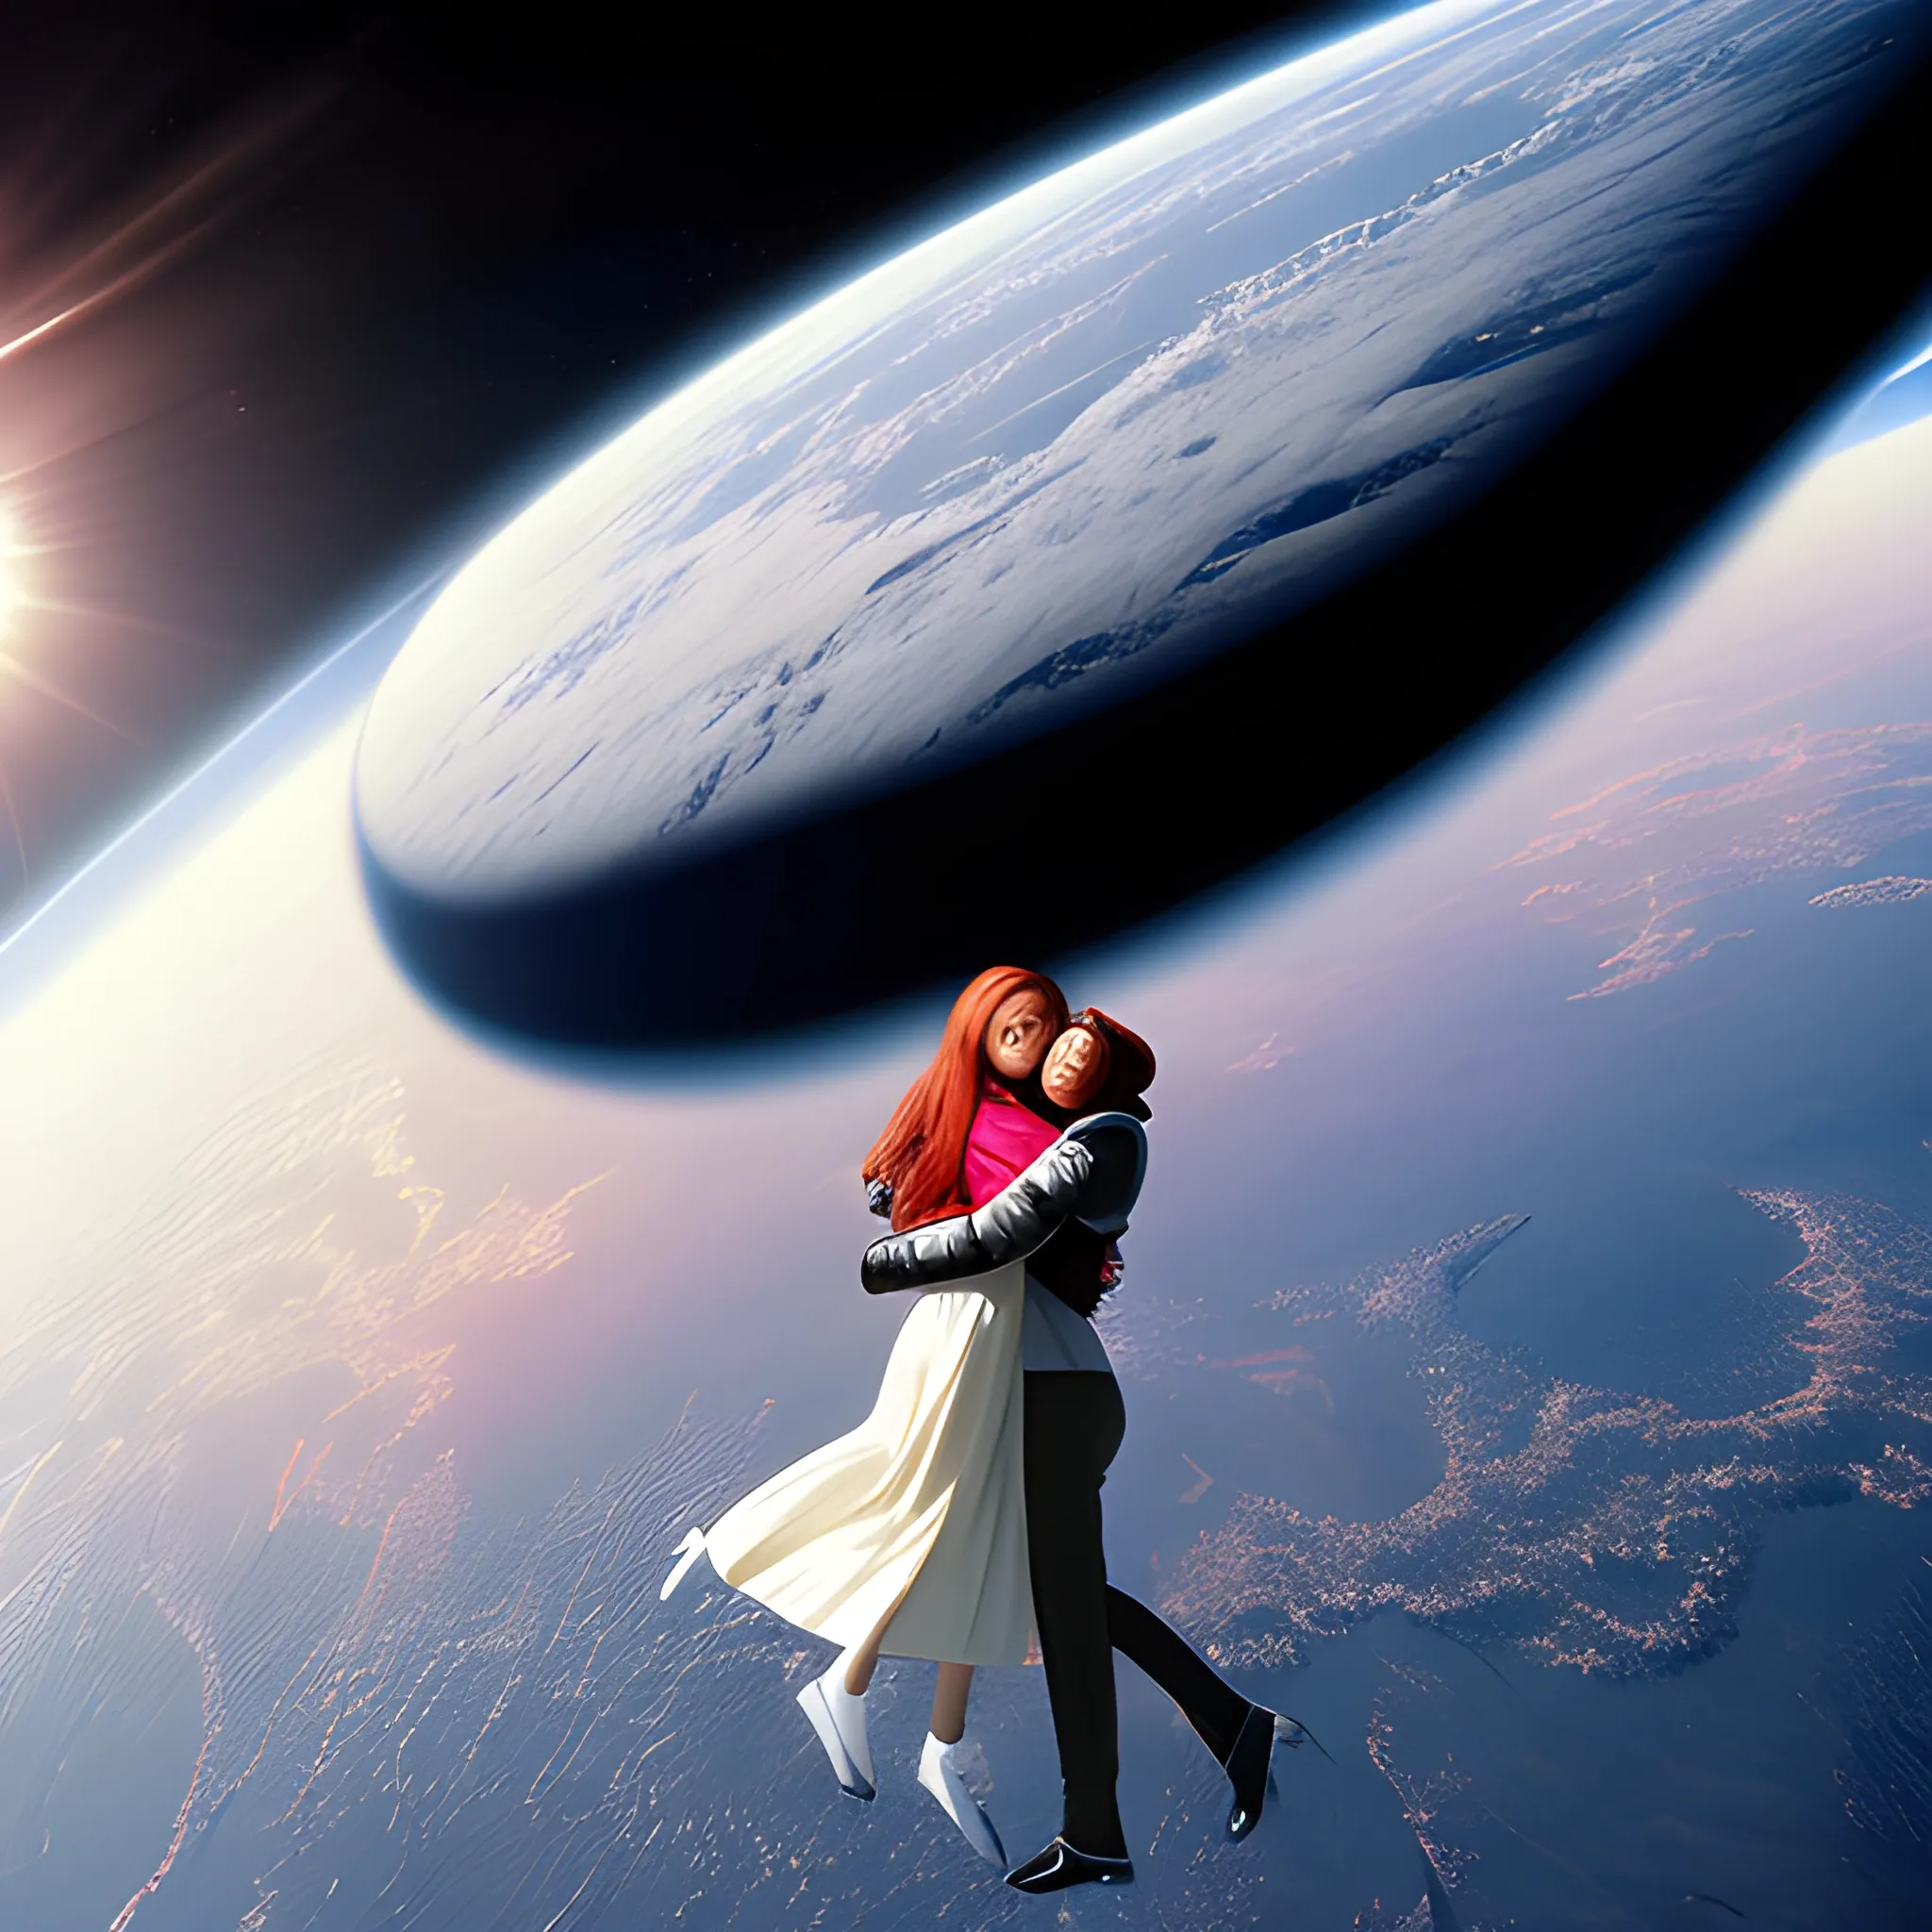 a big oval in space floating with apink woman hugging it